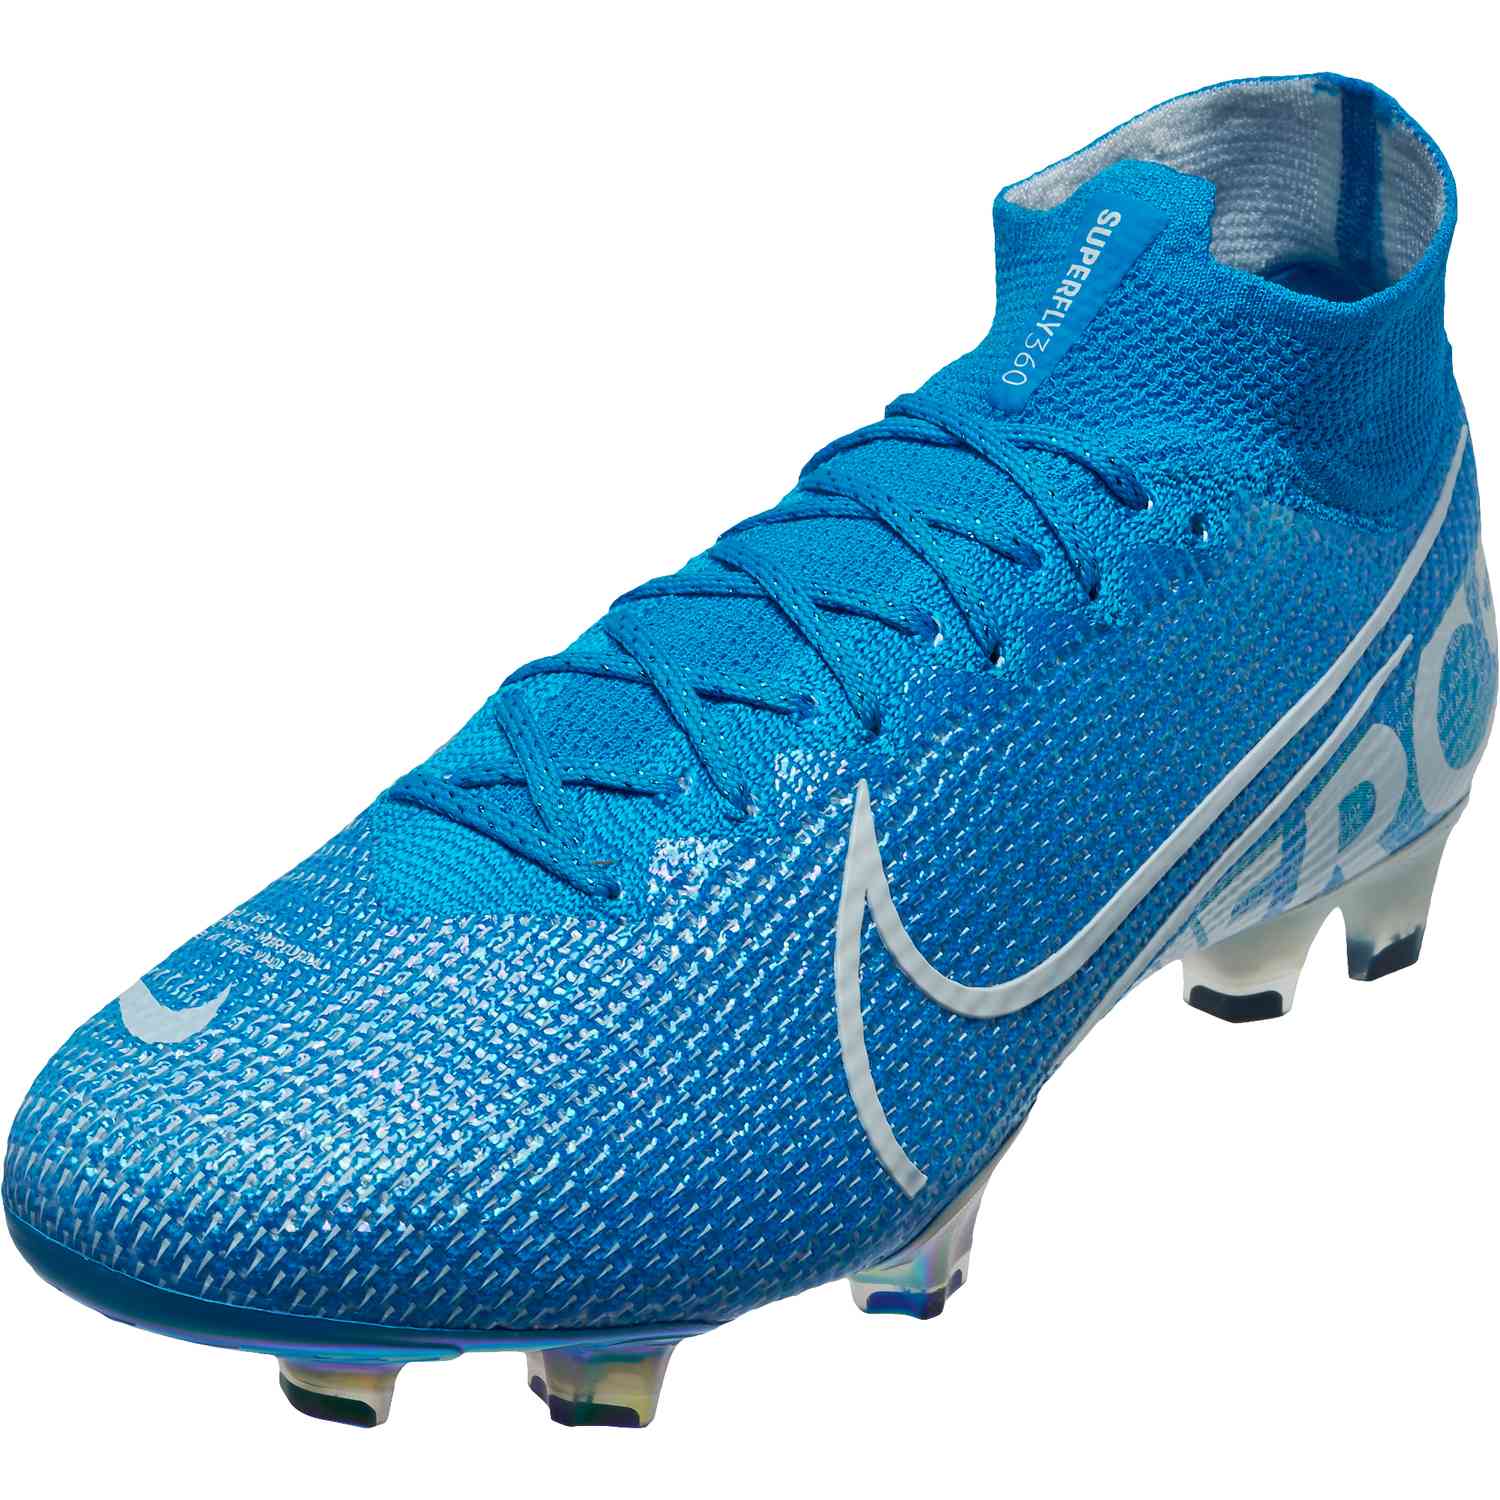 nike superfly soccer boots